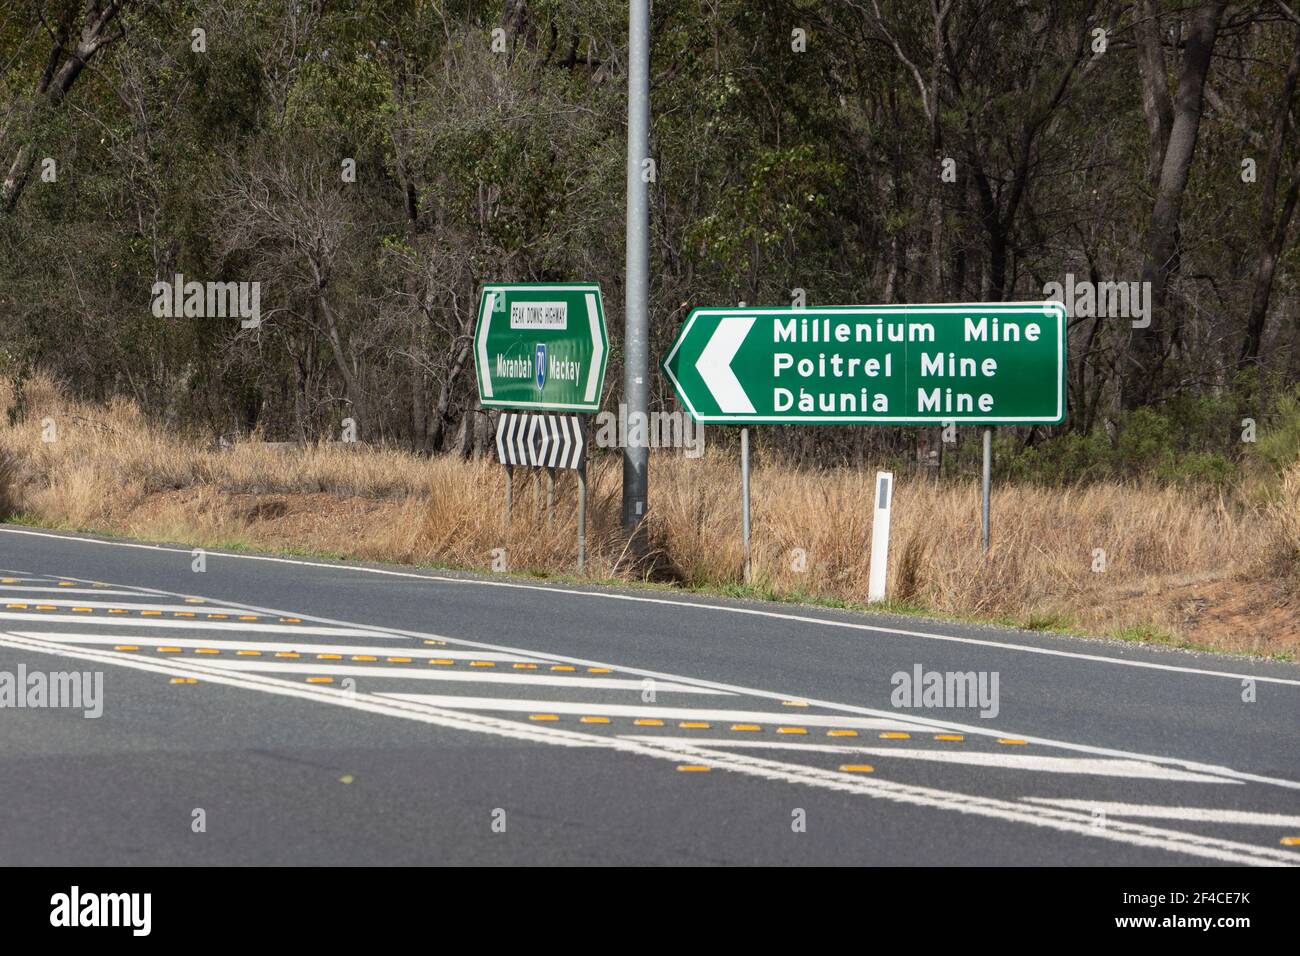 Direction signpost for the Millenium, Poitrel and Daunia coal mines in the Bowen Basin, Central Queensland on the highway between Mackay and Moranbah. Stock Photo